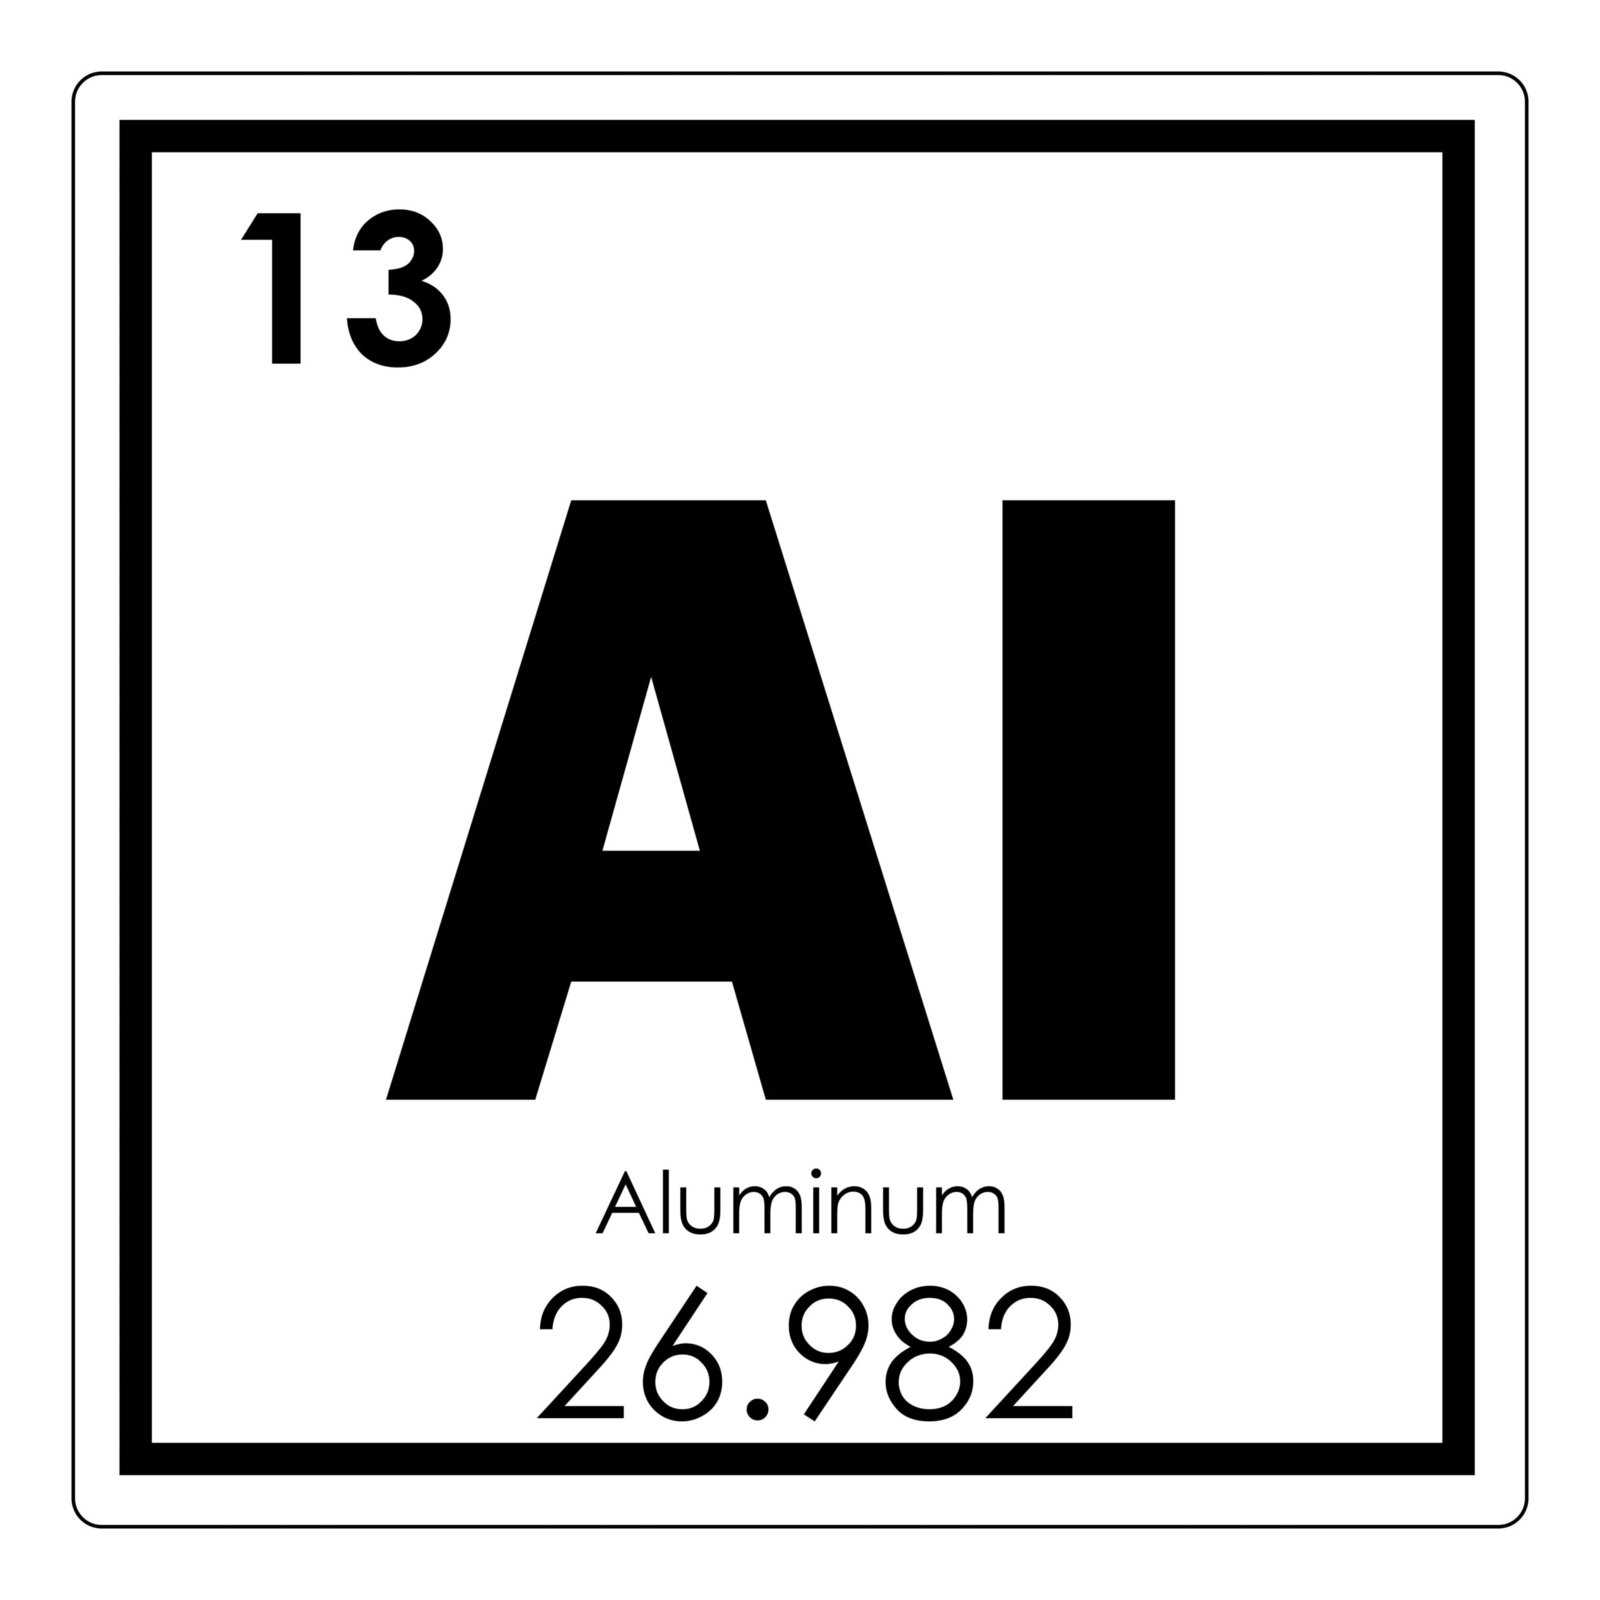 Aluminum; 5 Facts about The Amazing Metal Present in Our Daily Lives